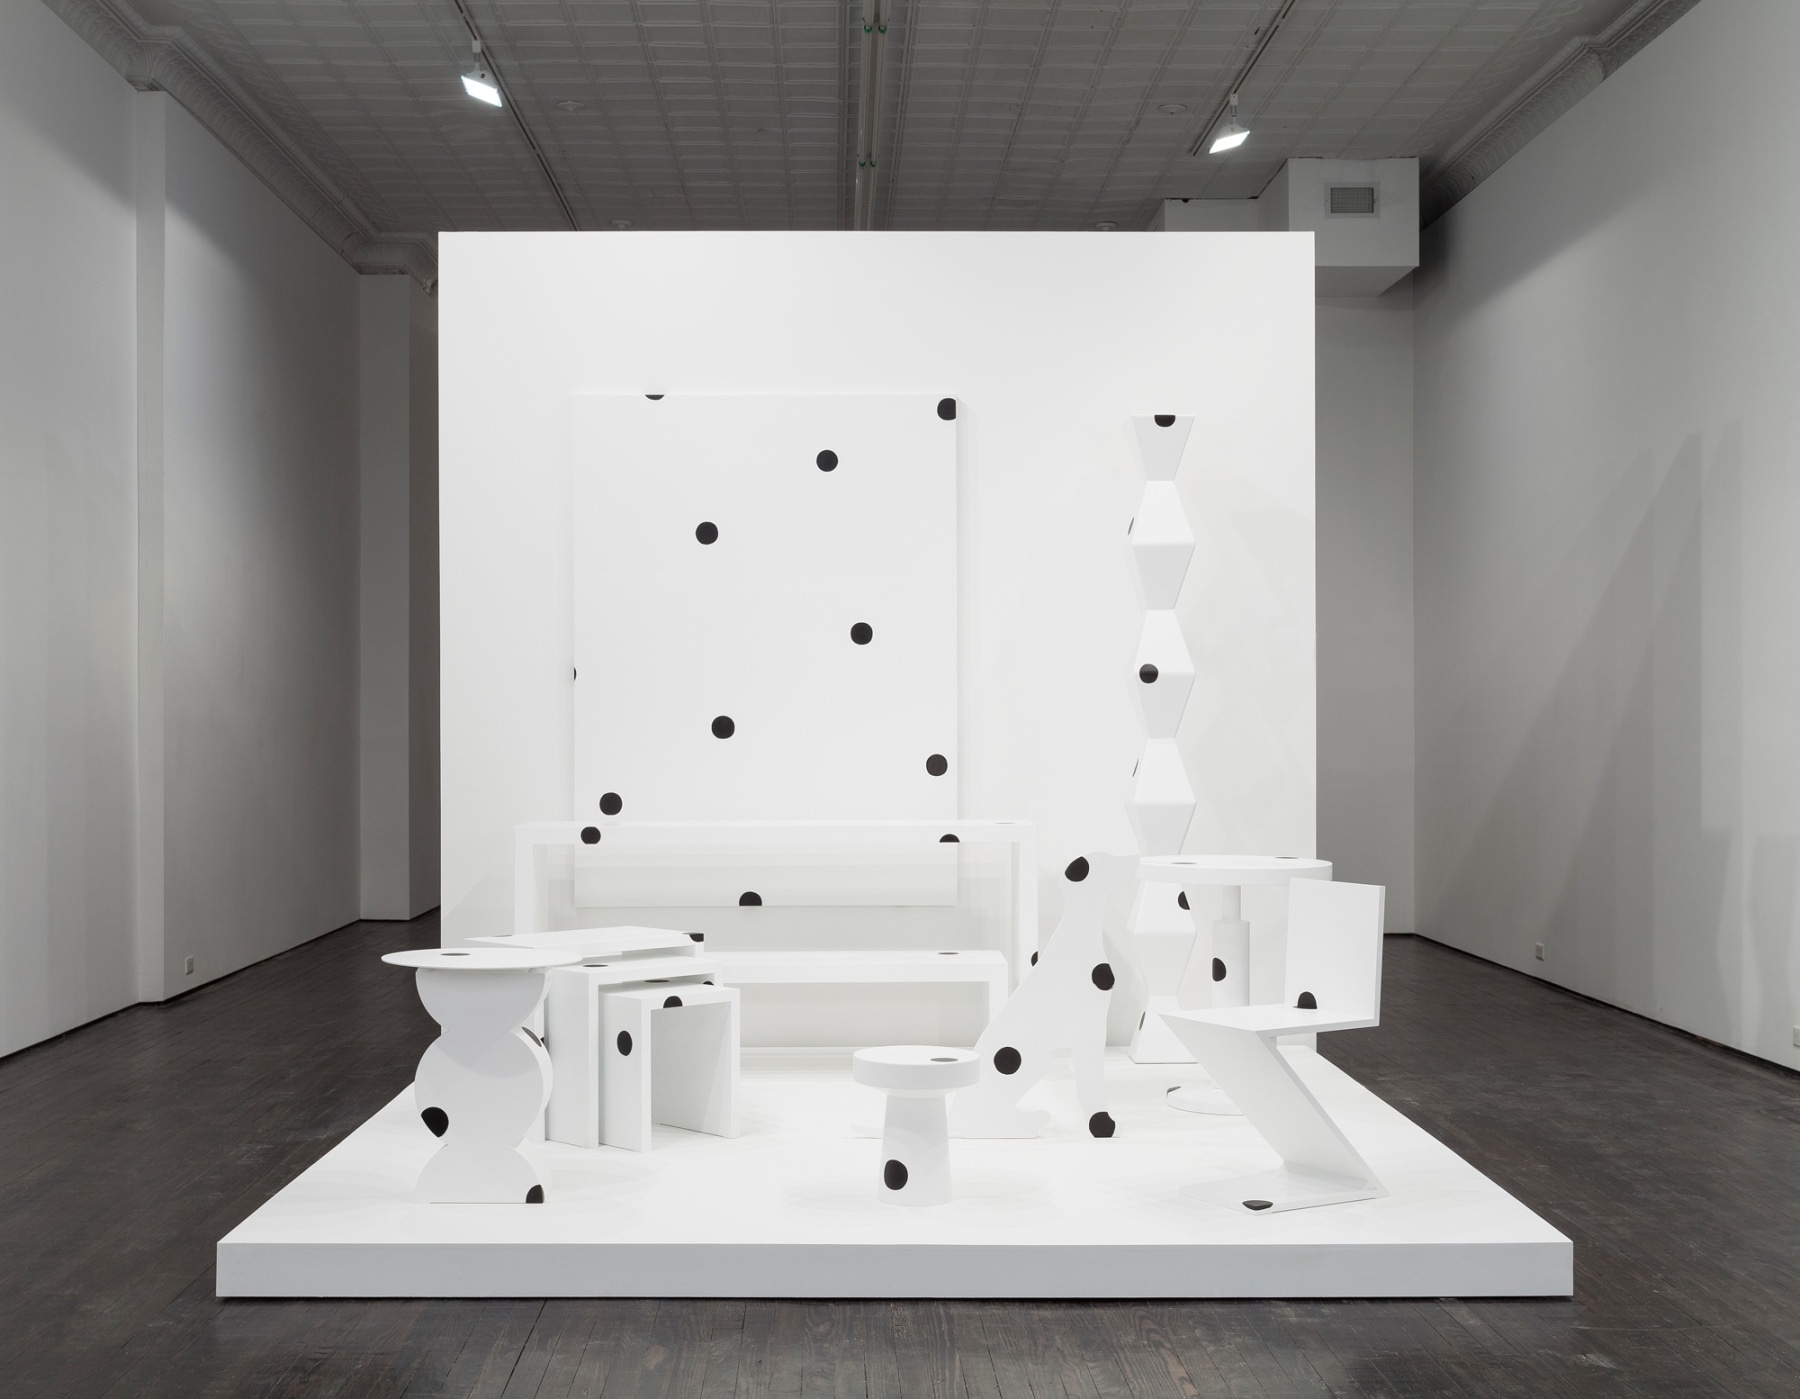 Abstract white furniture covered in black polka dots